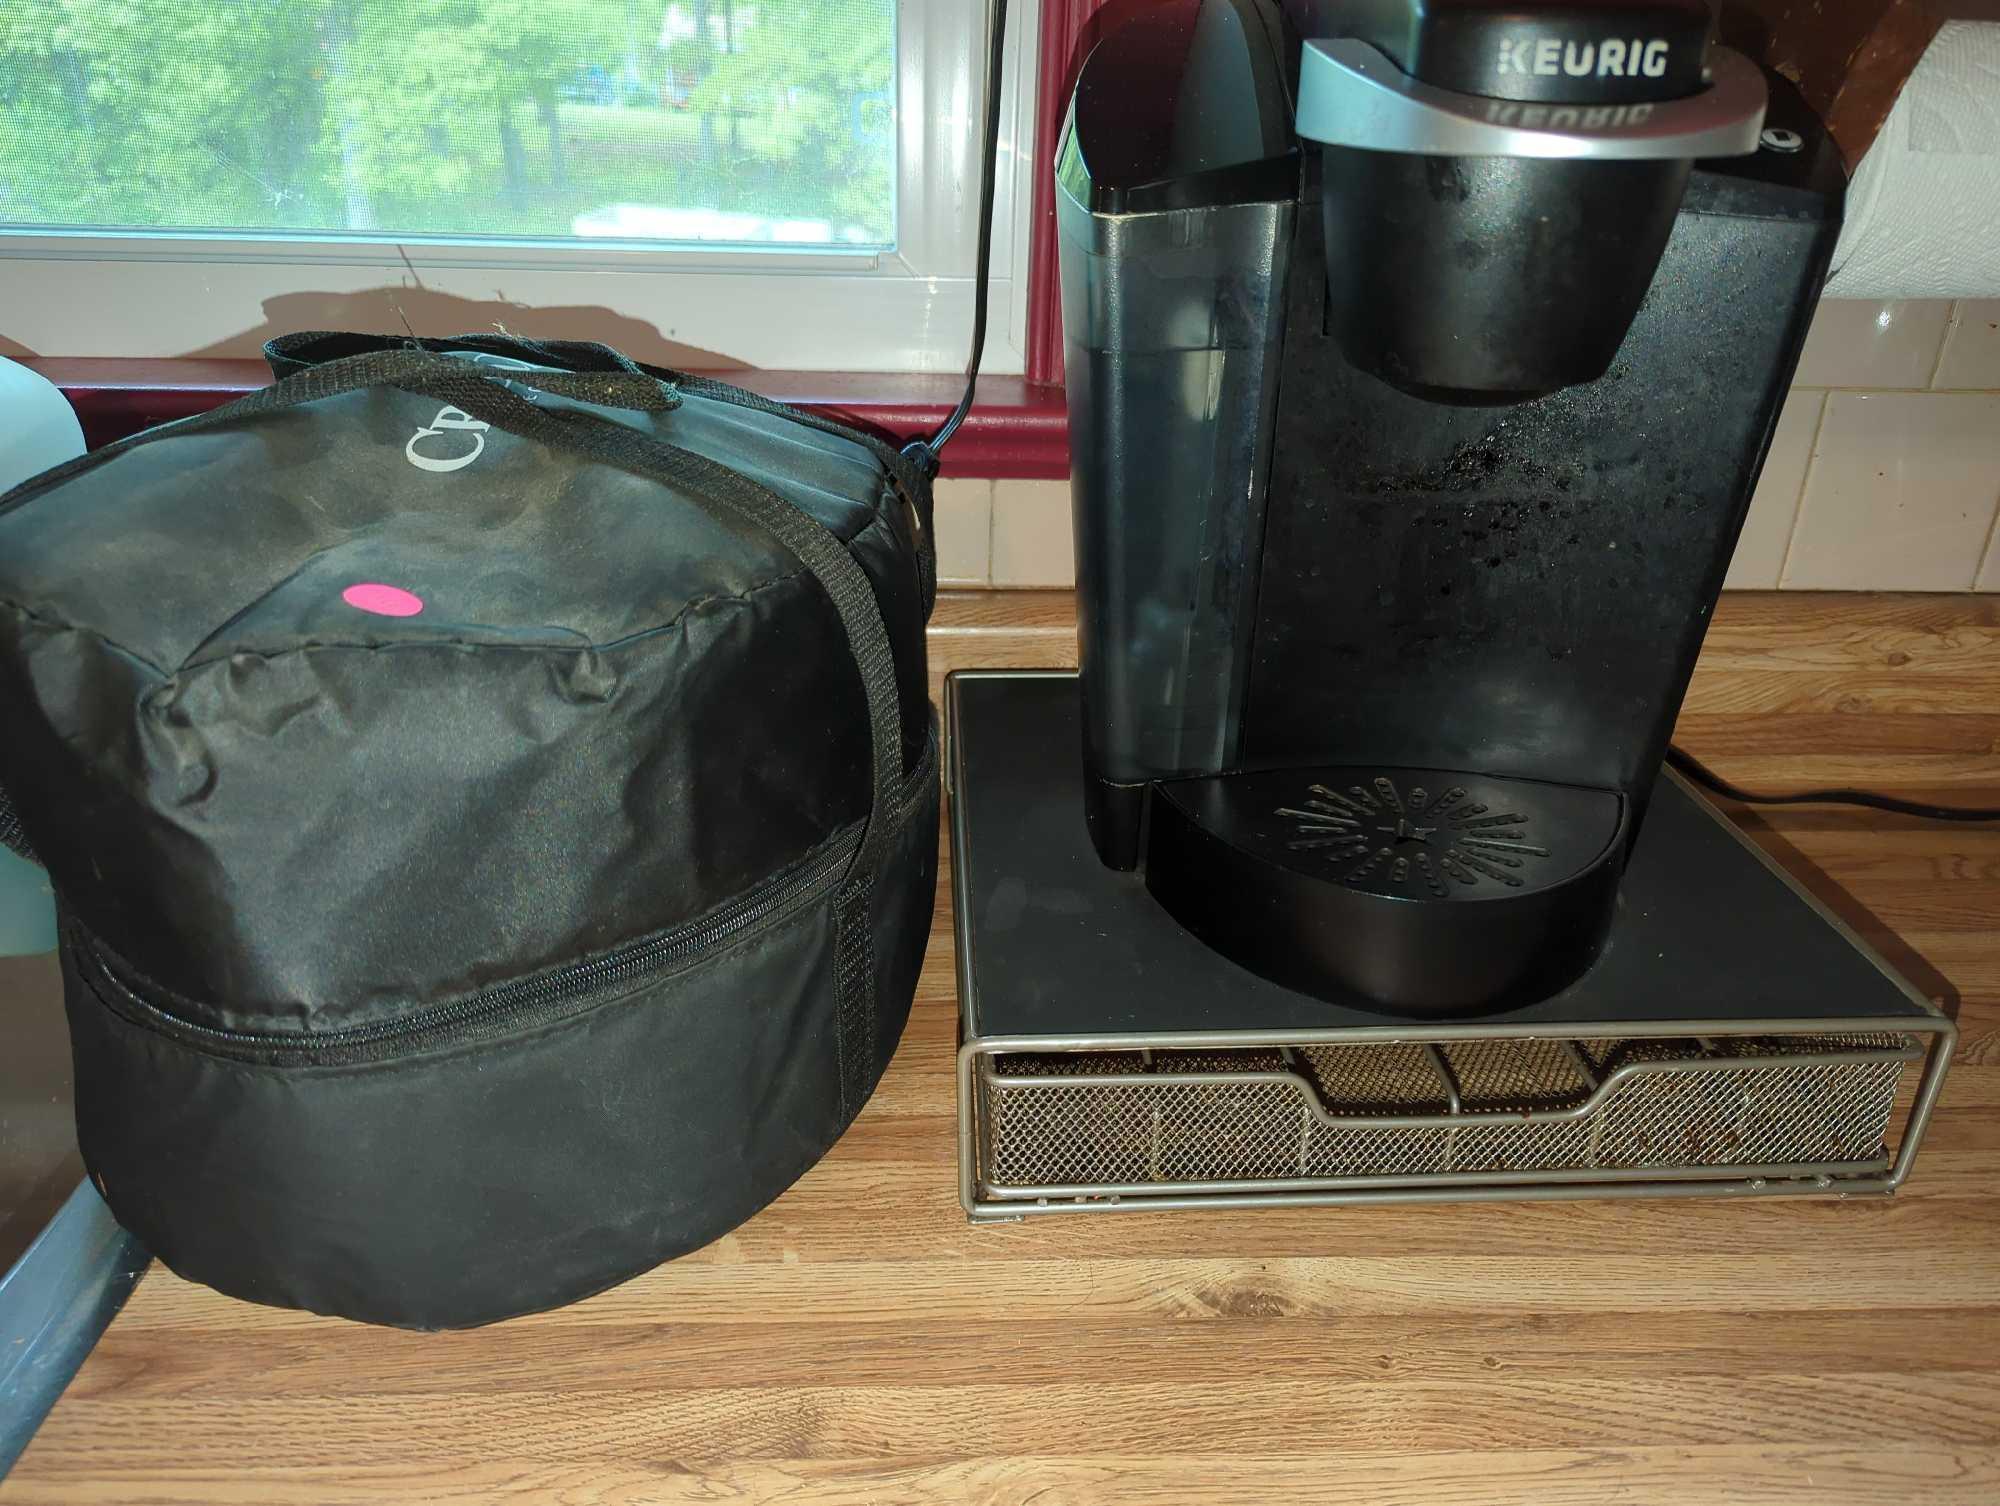 (KIT) LOT OF 2 ITEMS TO INCLUDE, KEURIG COFFEE MAKER & POD (DR)AWER, AND CROCK-POT SLOW COOKER